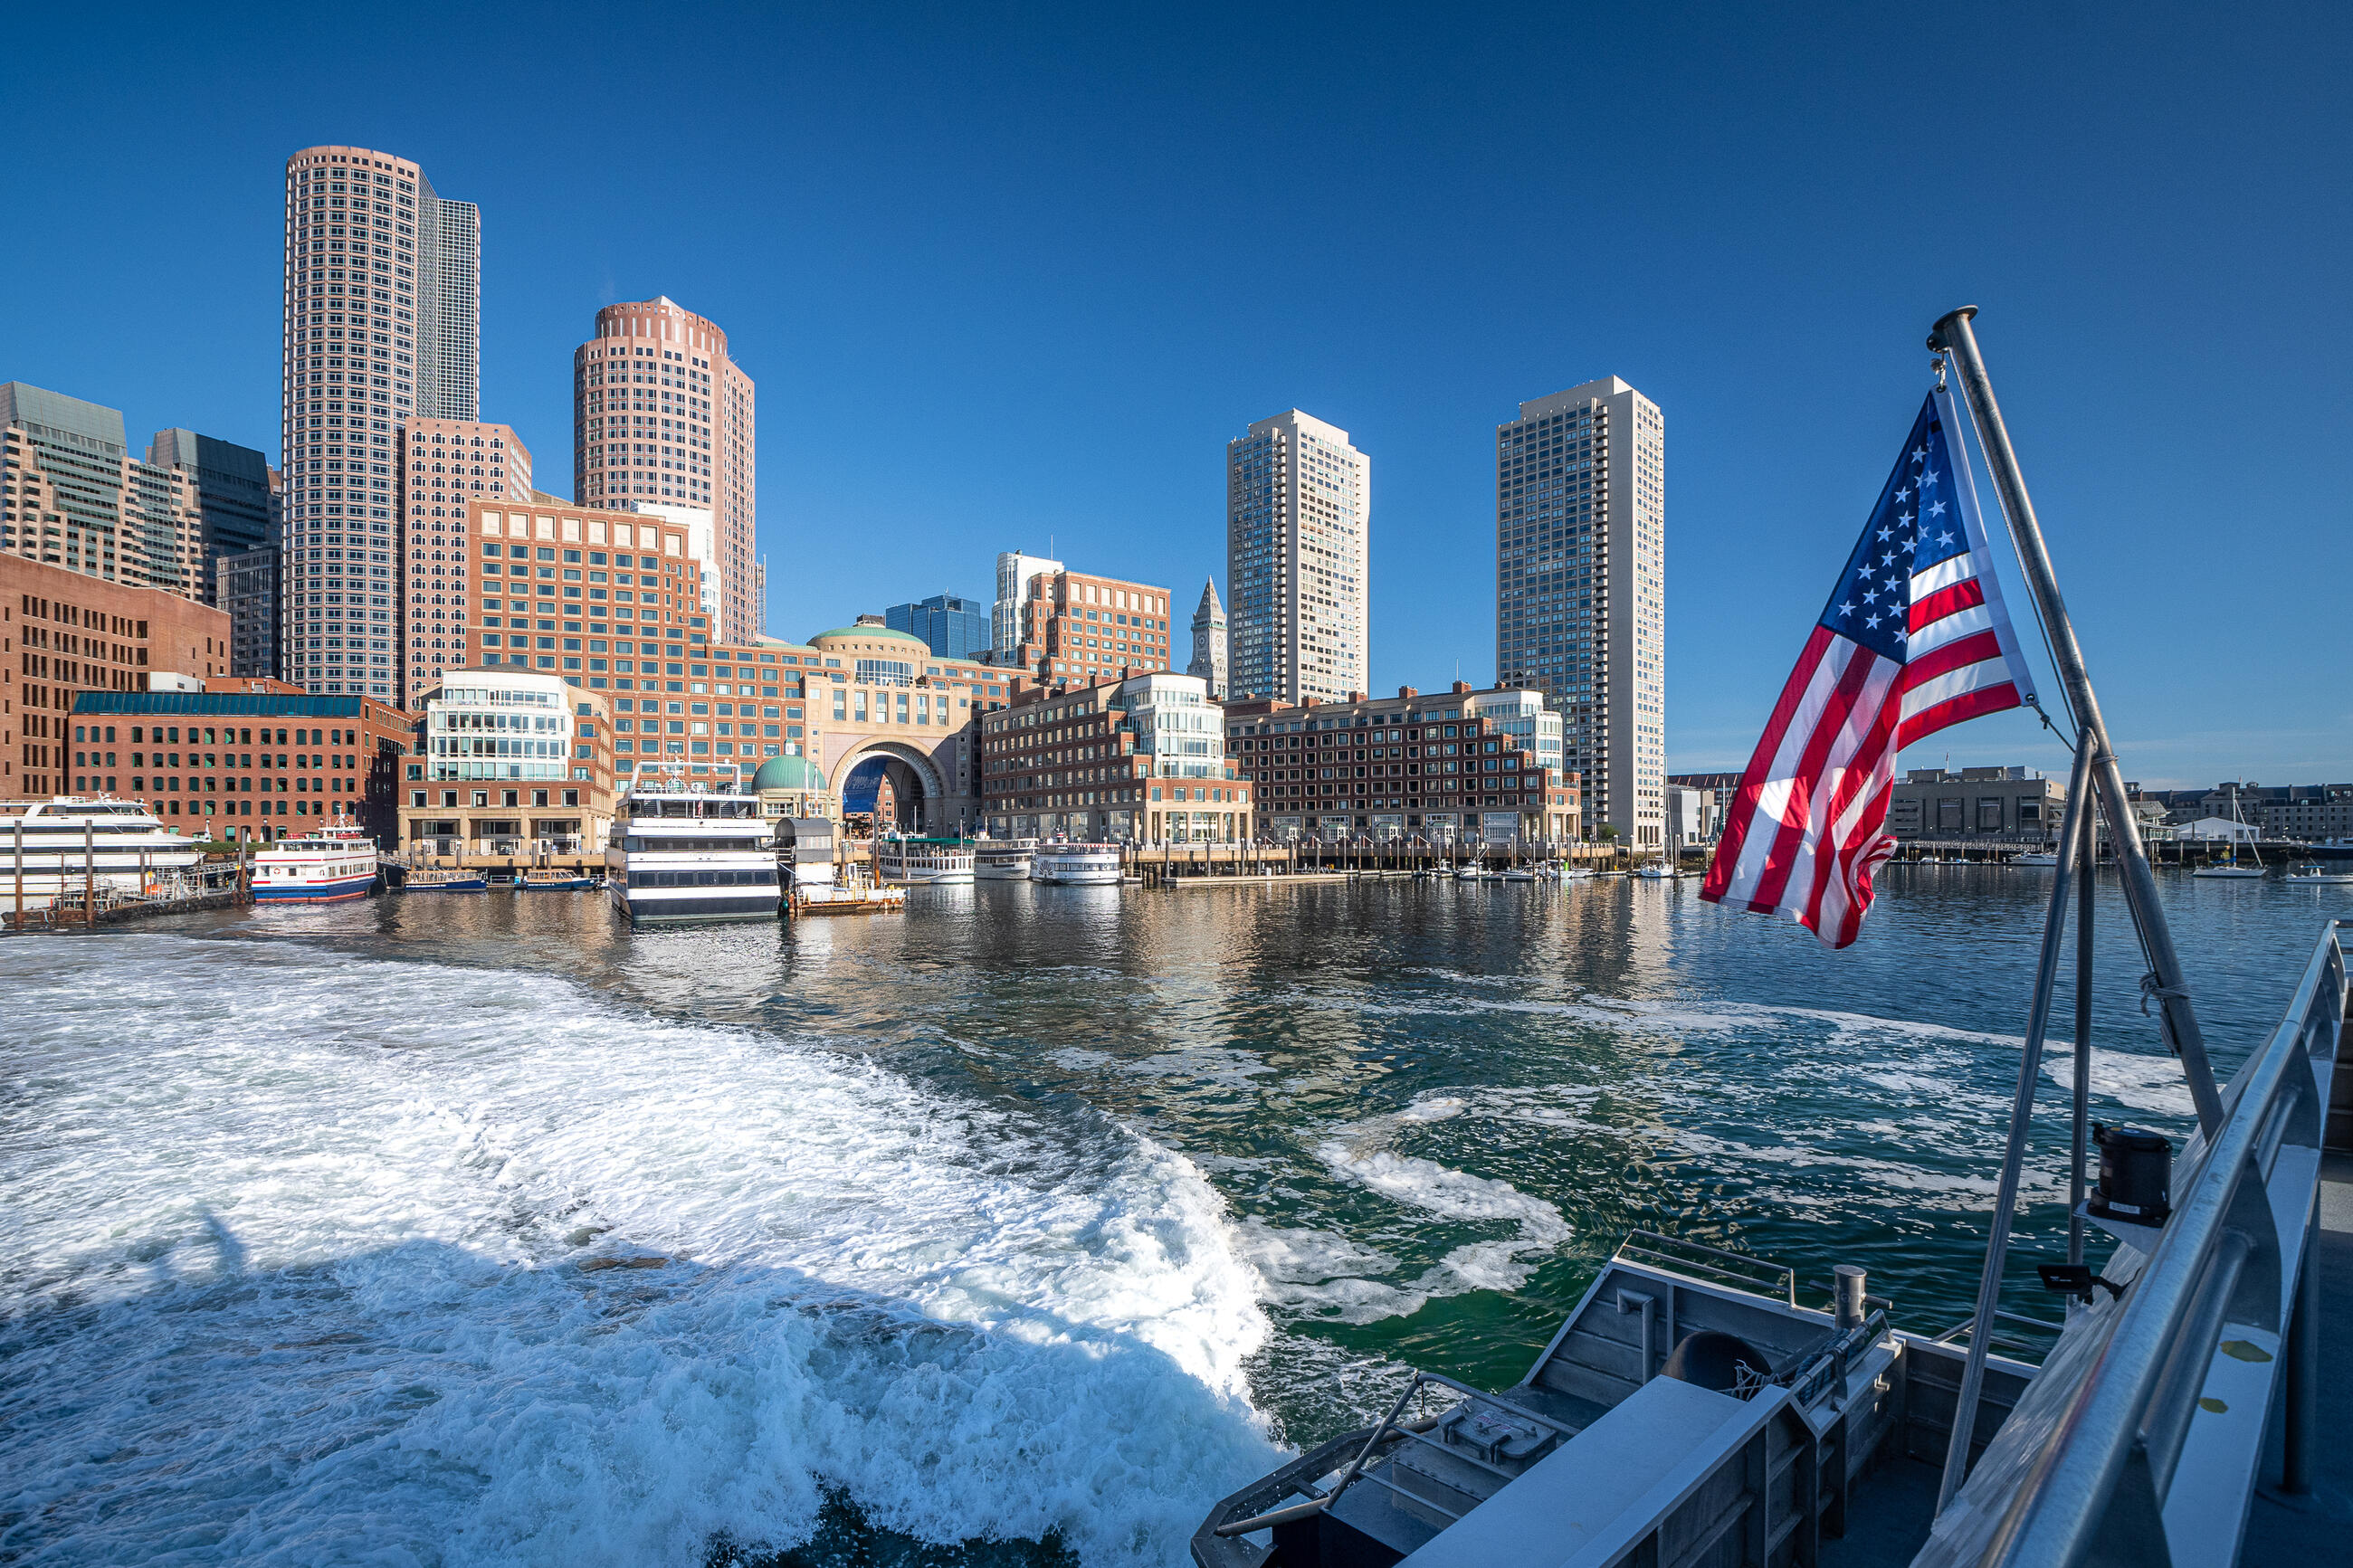 A photo of Rowes Wharf, taken from the ferry across the water. The water is white from the wake of the ferry moving in the water. A United States flag is flying at an angle from the side of the boat, and the sky is a bright clear blue 